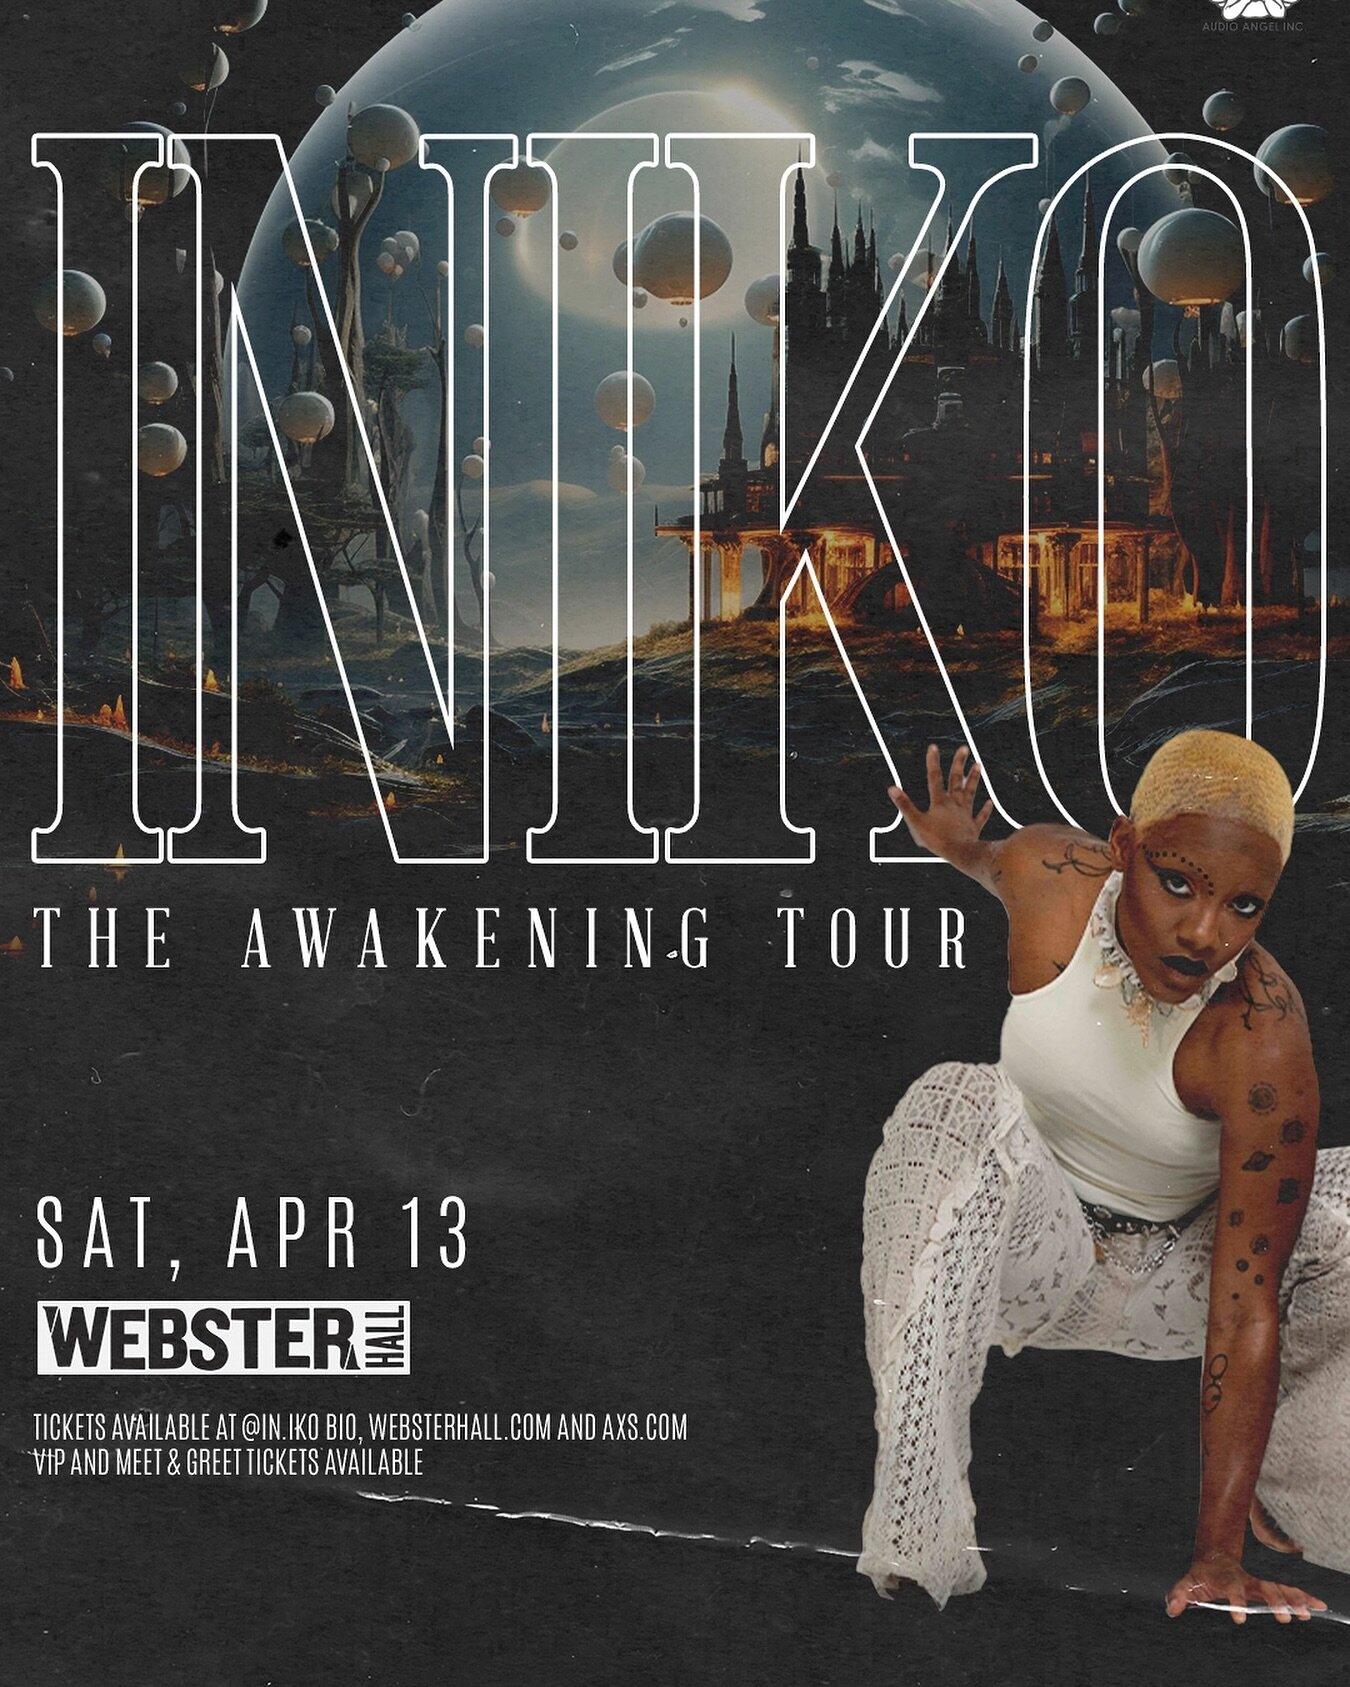 ✨GIVEAWAY✨

Thanks to our friends @bowerypresents we have 2x tix to giveaway for the incredibly talented @in.iko show this Saturday April 13th at @websterhall 

✨Comment below &ldquo;ILY INIKO&rdquo; to enter ✨Winner announced April 11th ✨Want an ext